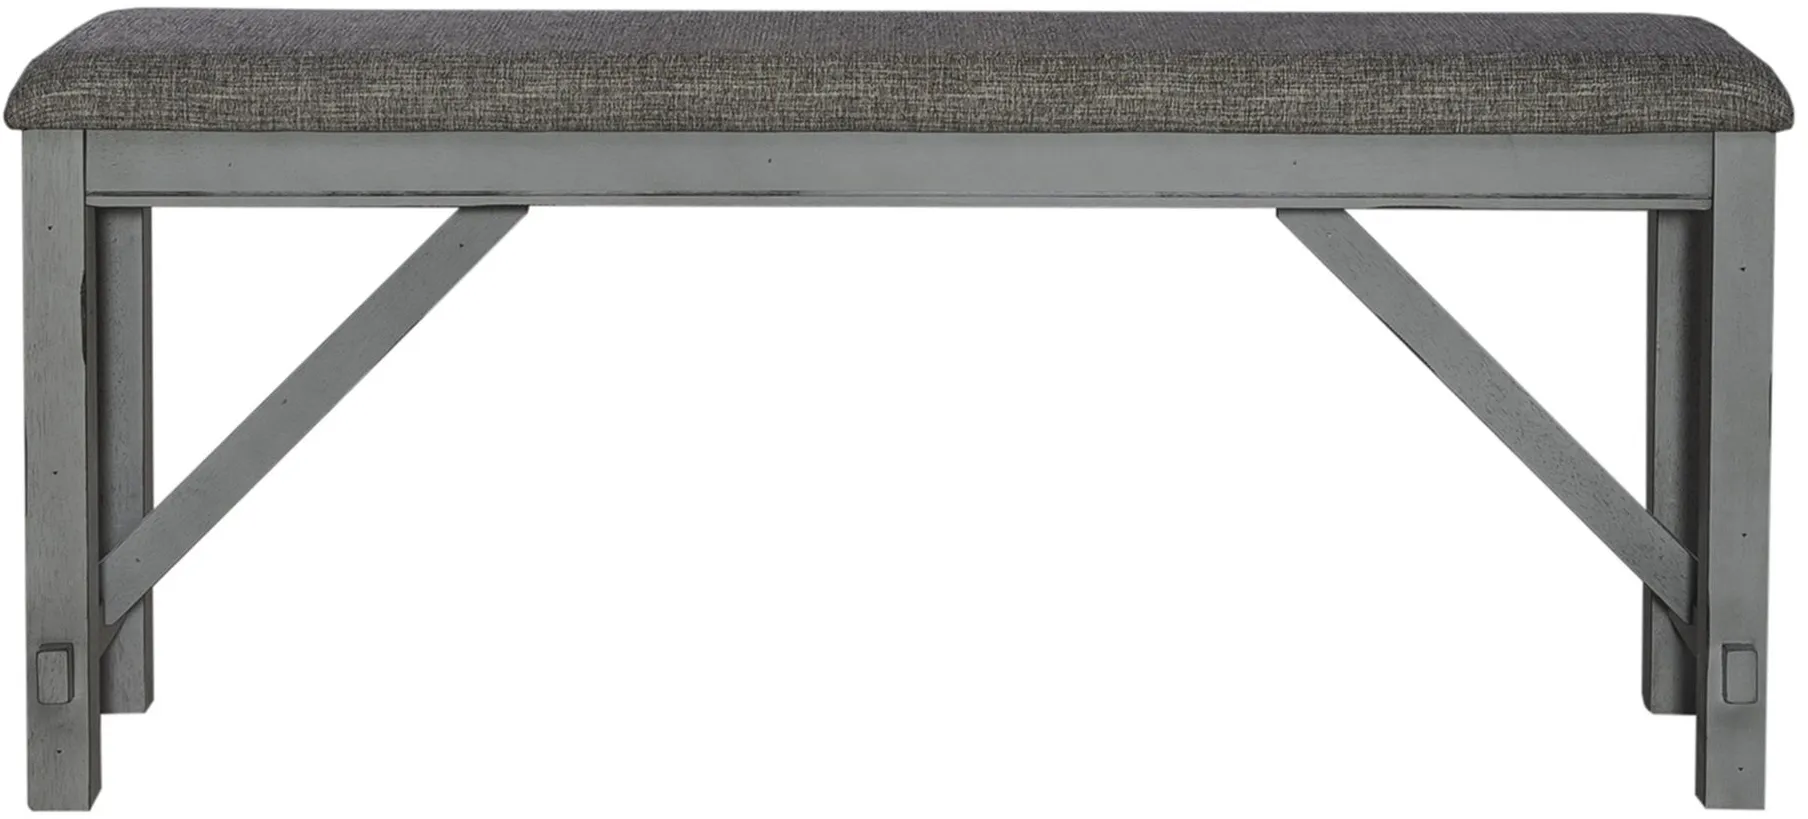 Newport Counter Height Dining Bench in Smokey Gray by Liberty Furniture